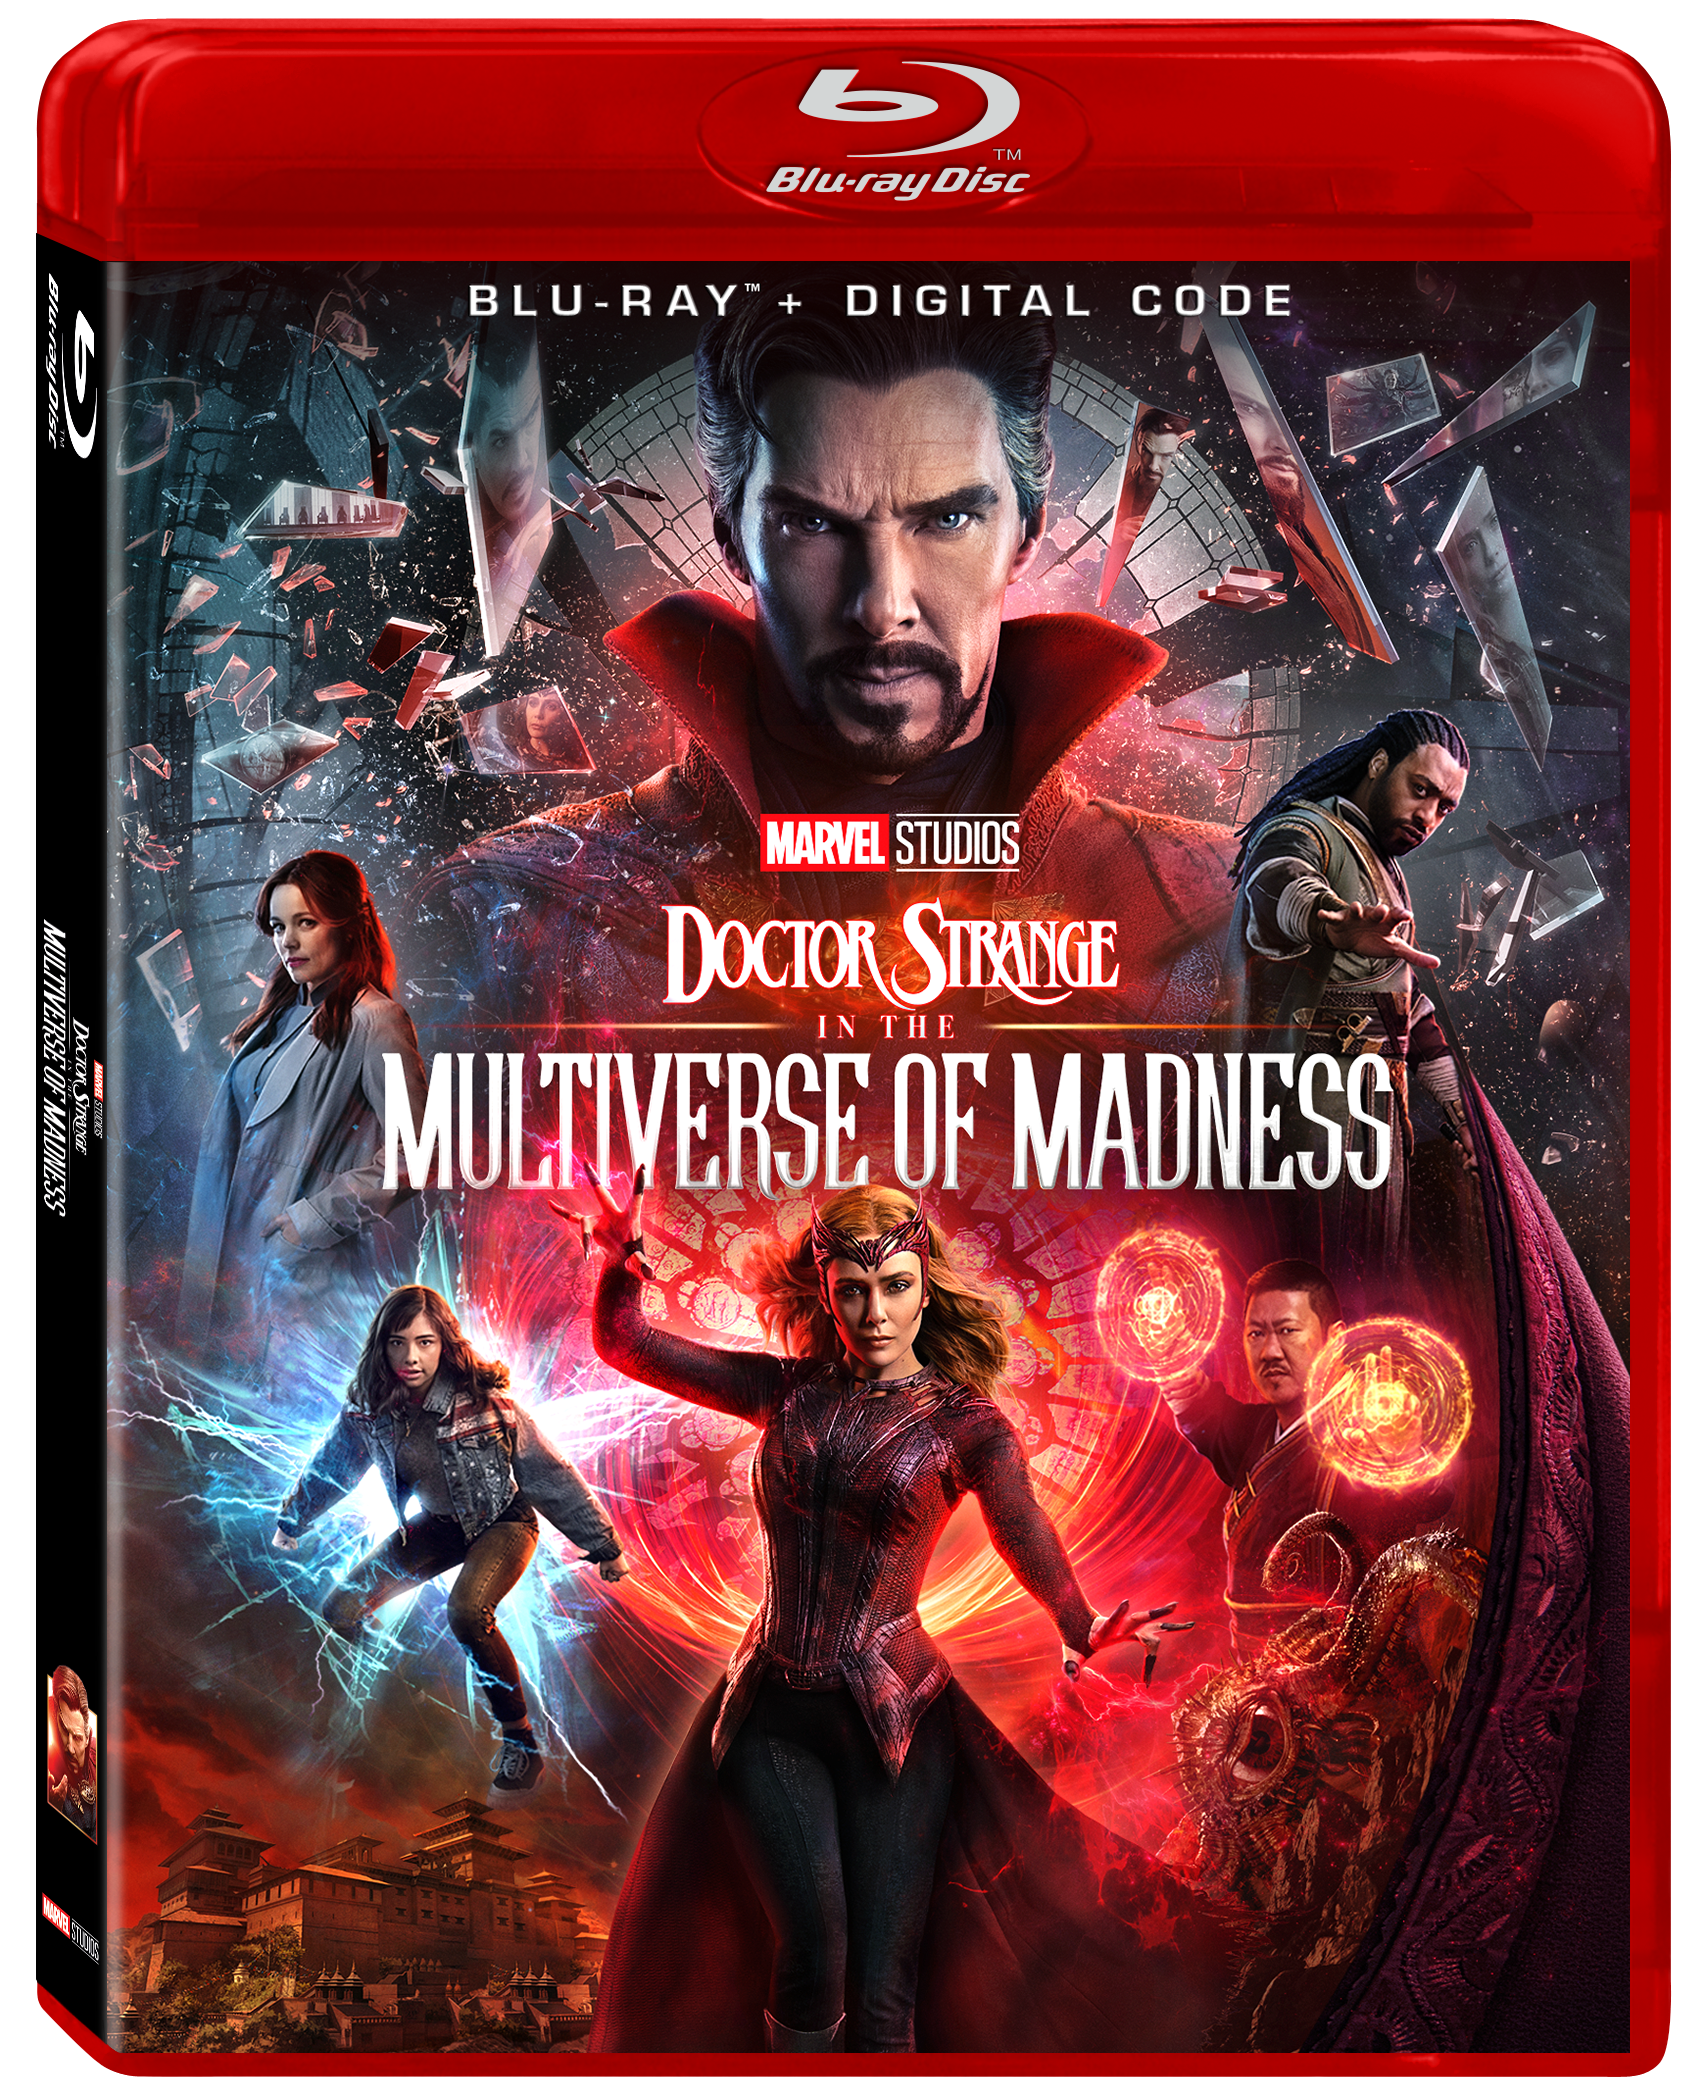 Doctor Strange in the Multiverse of Madness Blu-ray Cover